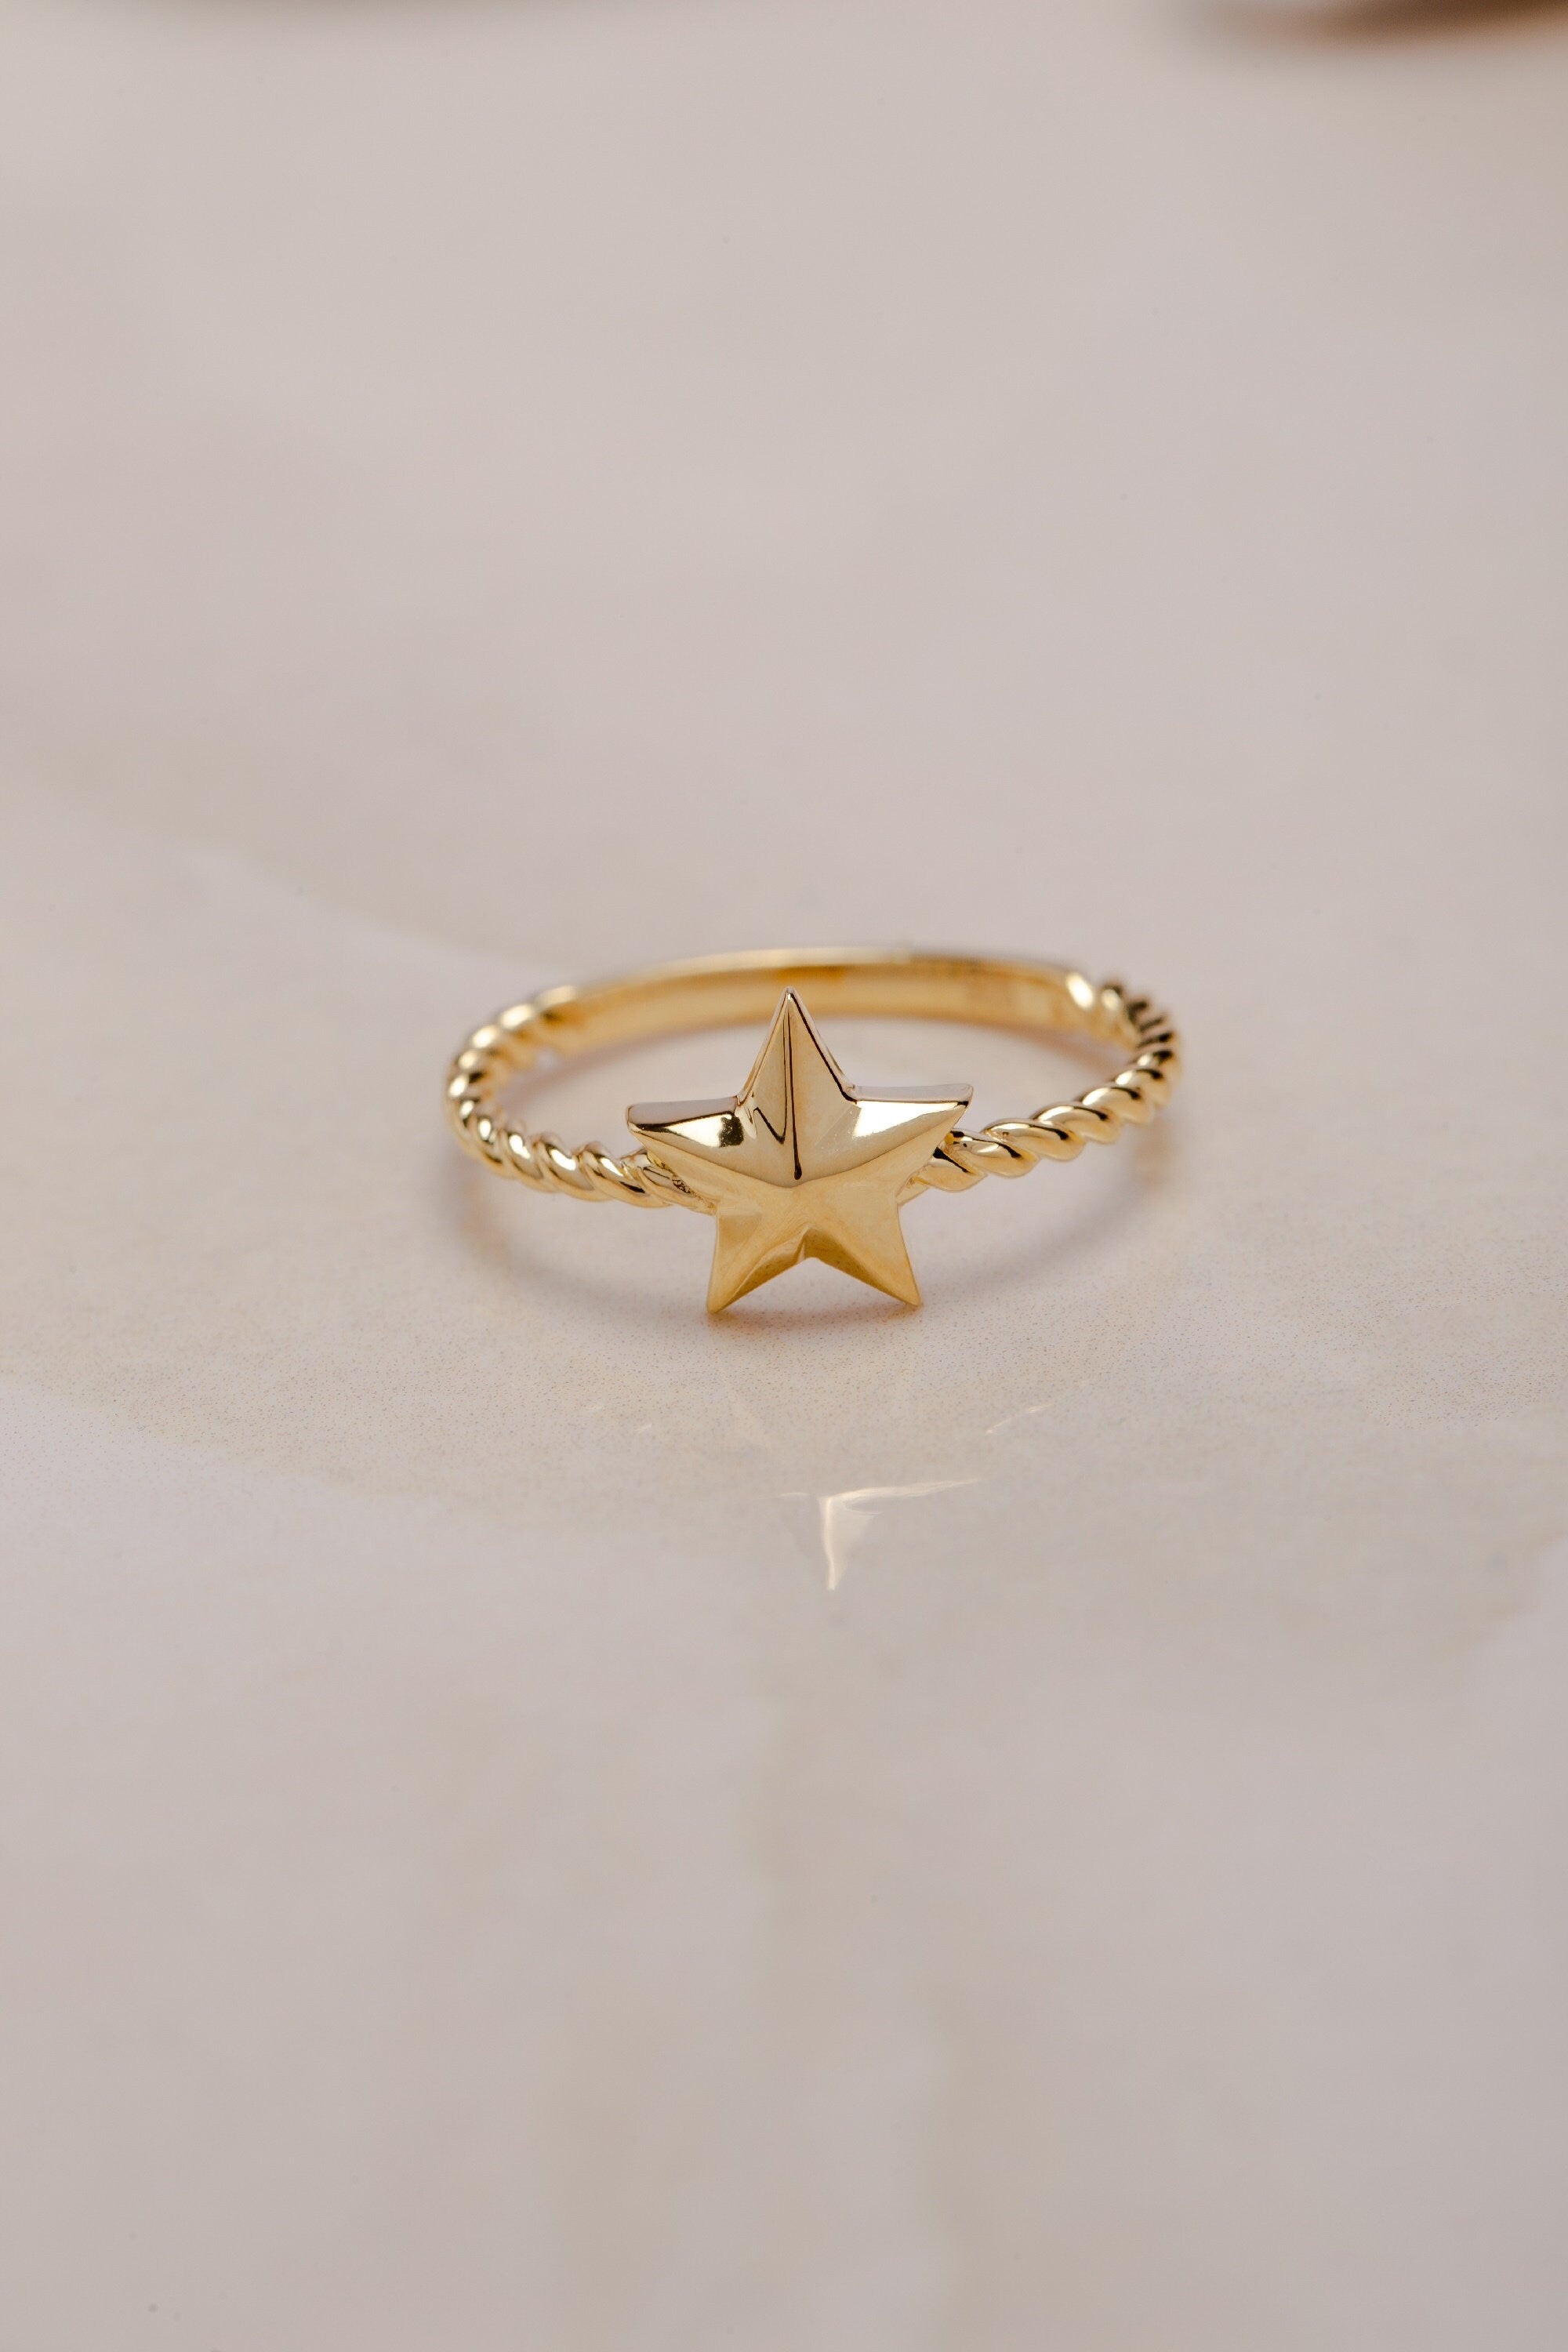 925 Sterling Silver Star Ring, Designer Star Shaped Ring, Handcrafted Ring, Dainty Star Ring, Gift For Mother Day, Mother Day Jewelry